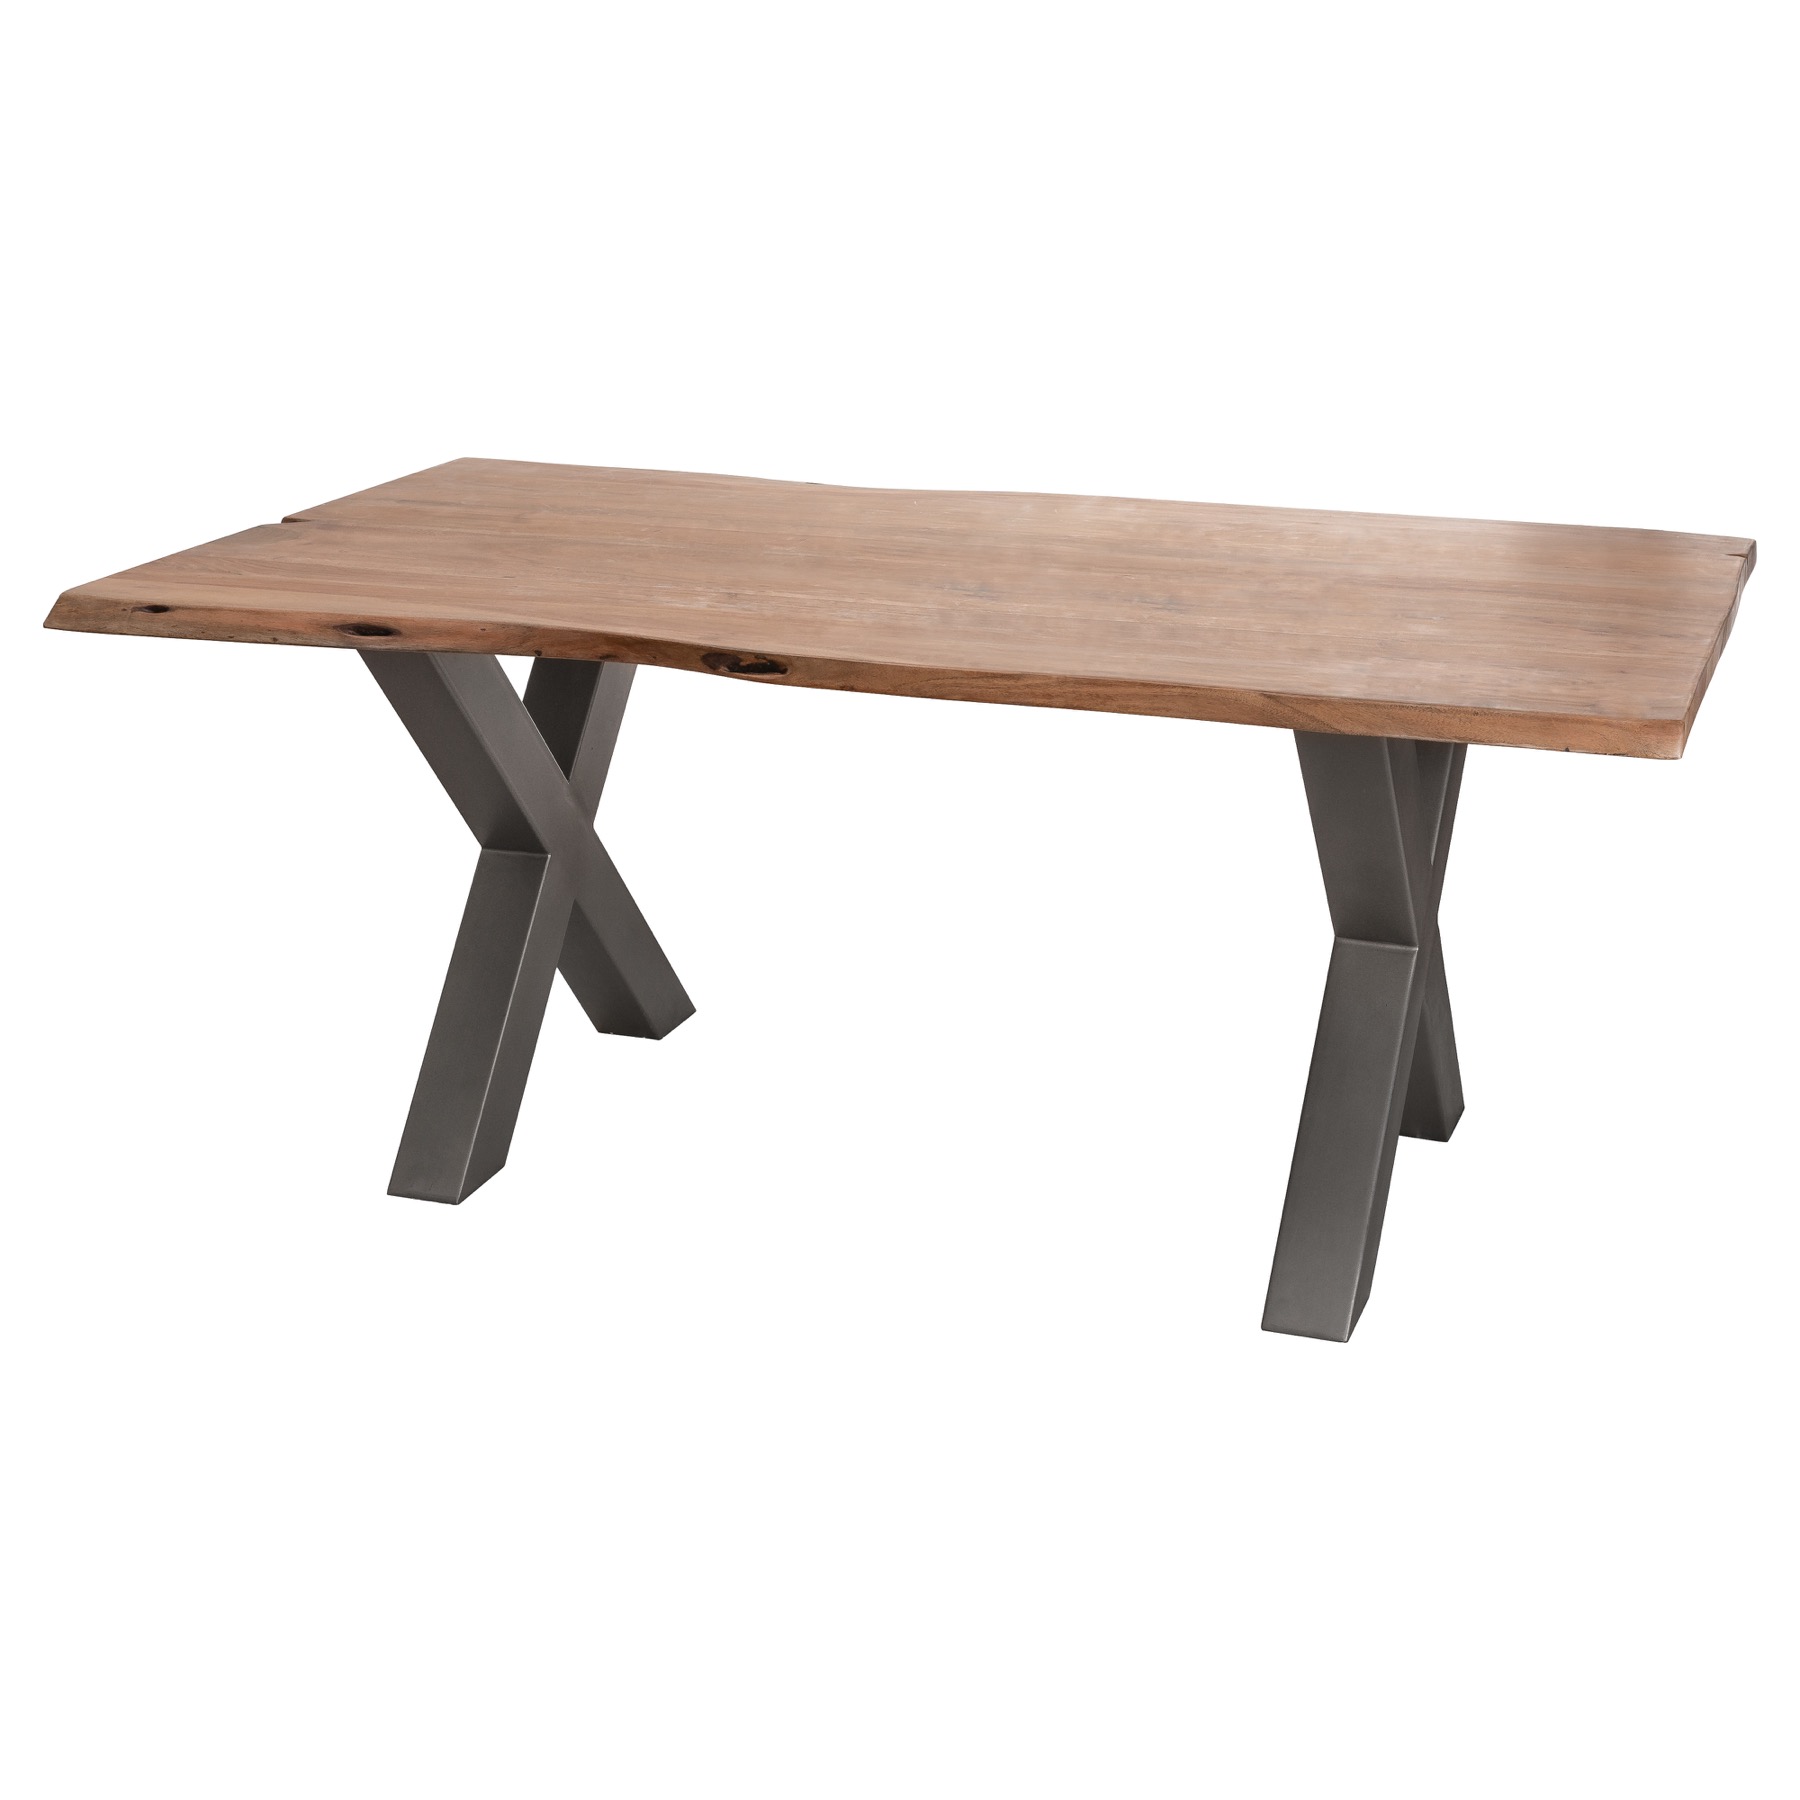 Live Edge Collection Dining Table - Image 1